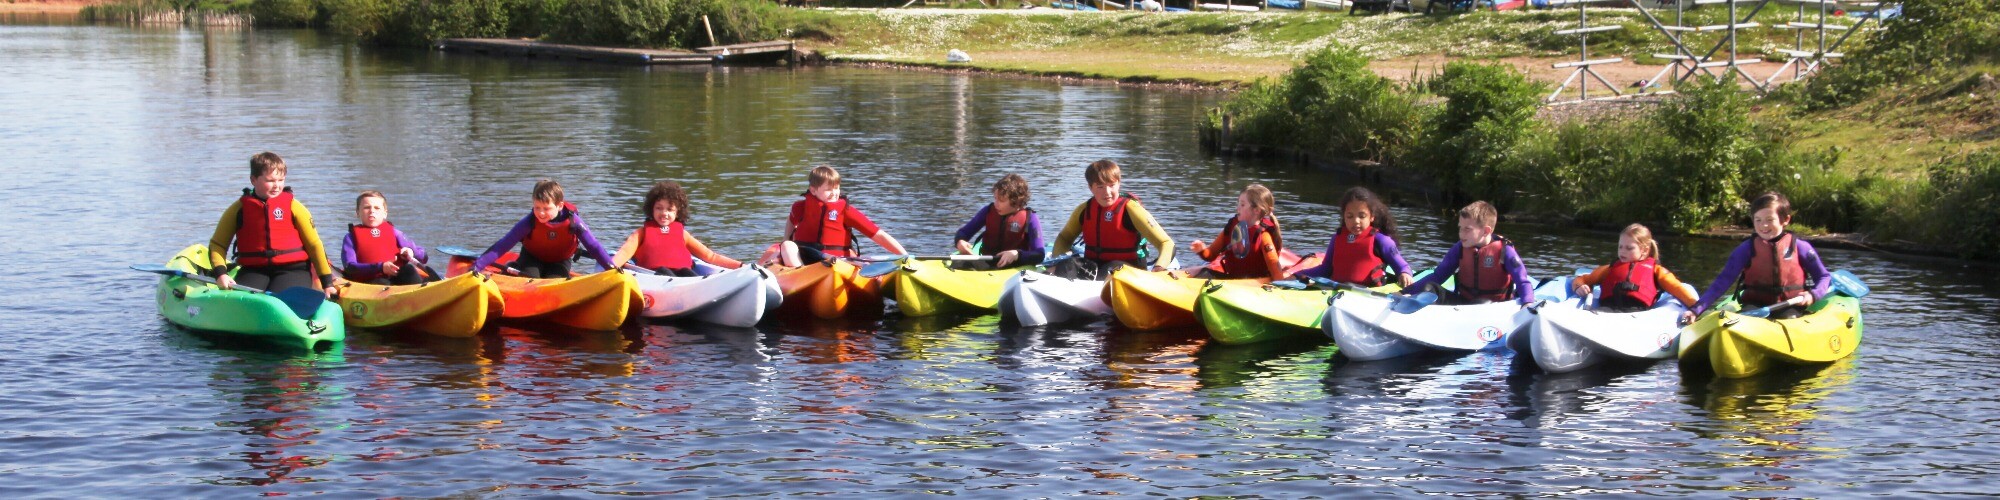 Twelve children sitting in single-sit-on-top hired Kayaks on a body of water